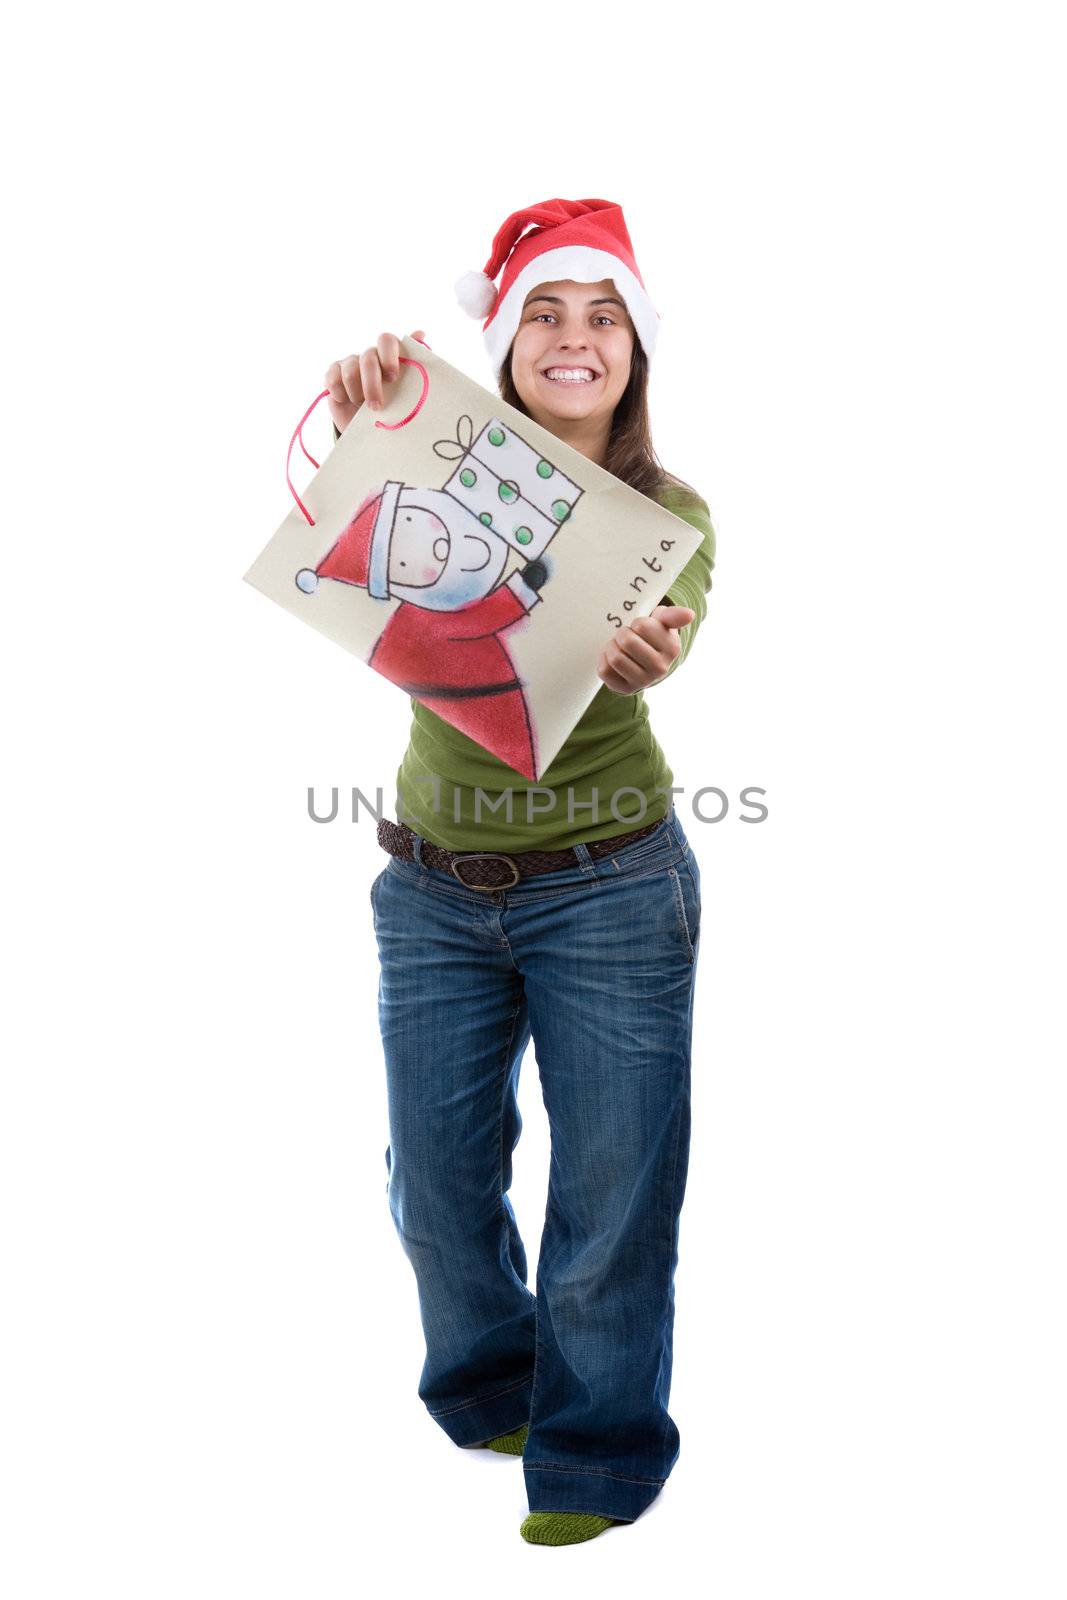 young santa woman celebrating christmas holding present bag. isolated on white background.